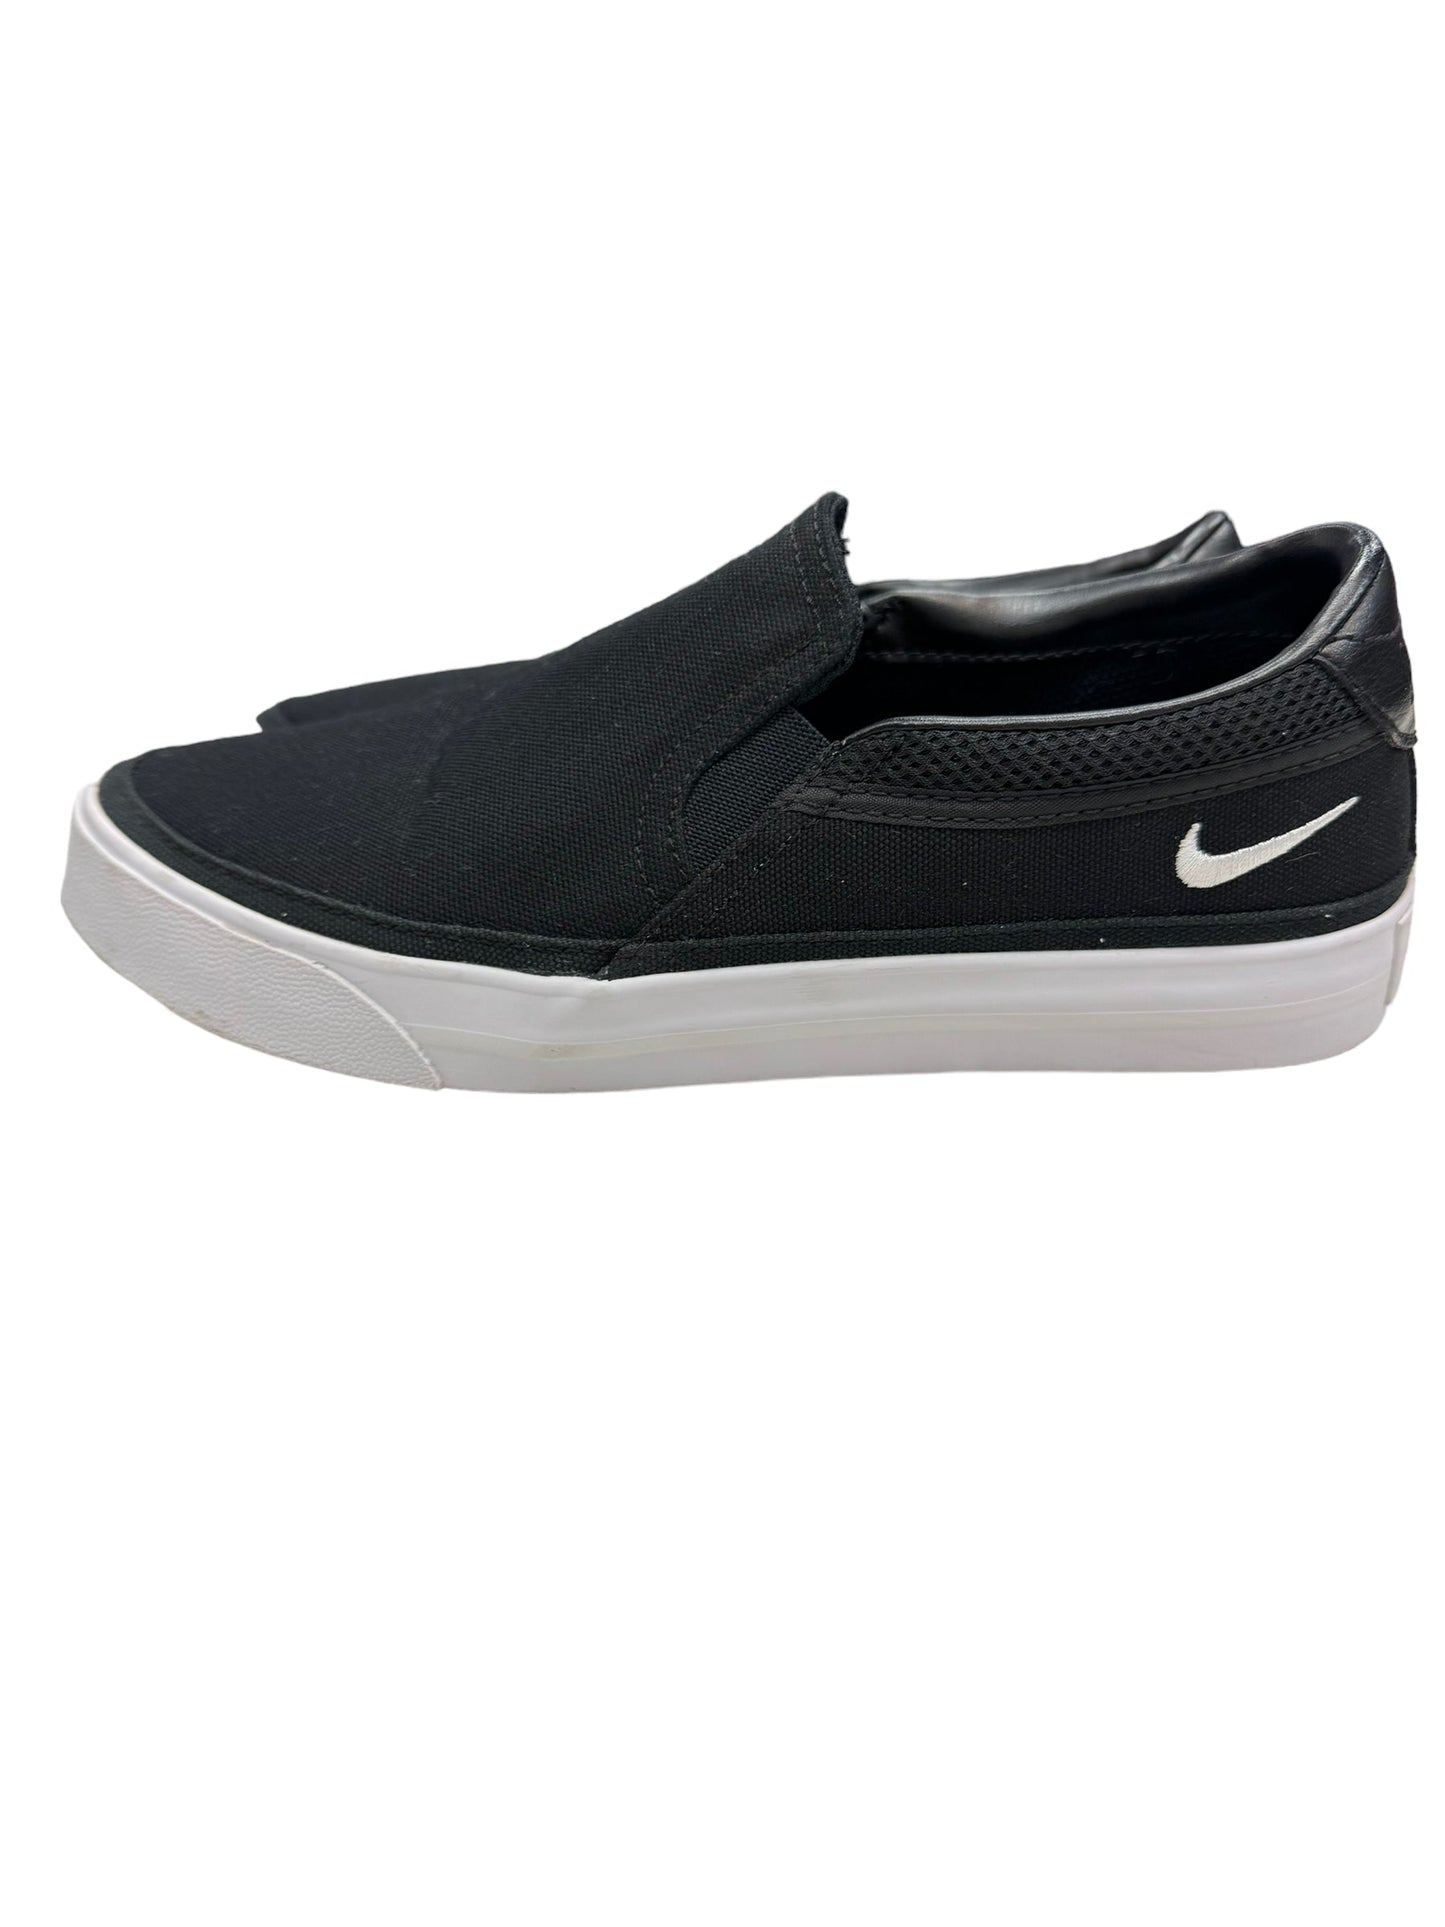 Shoes Flats Other By Nike  Size: 6.5